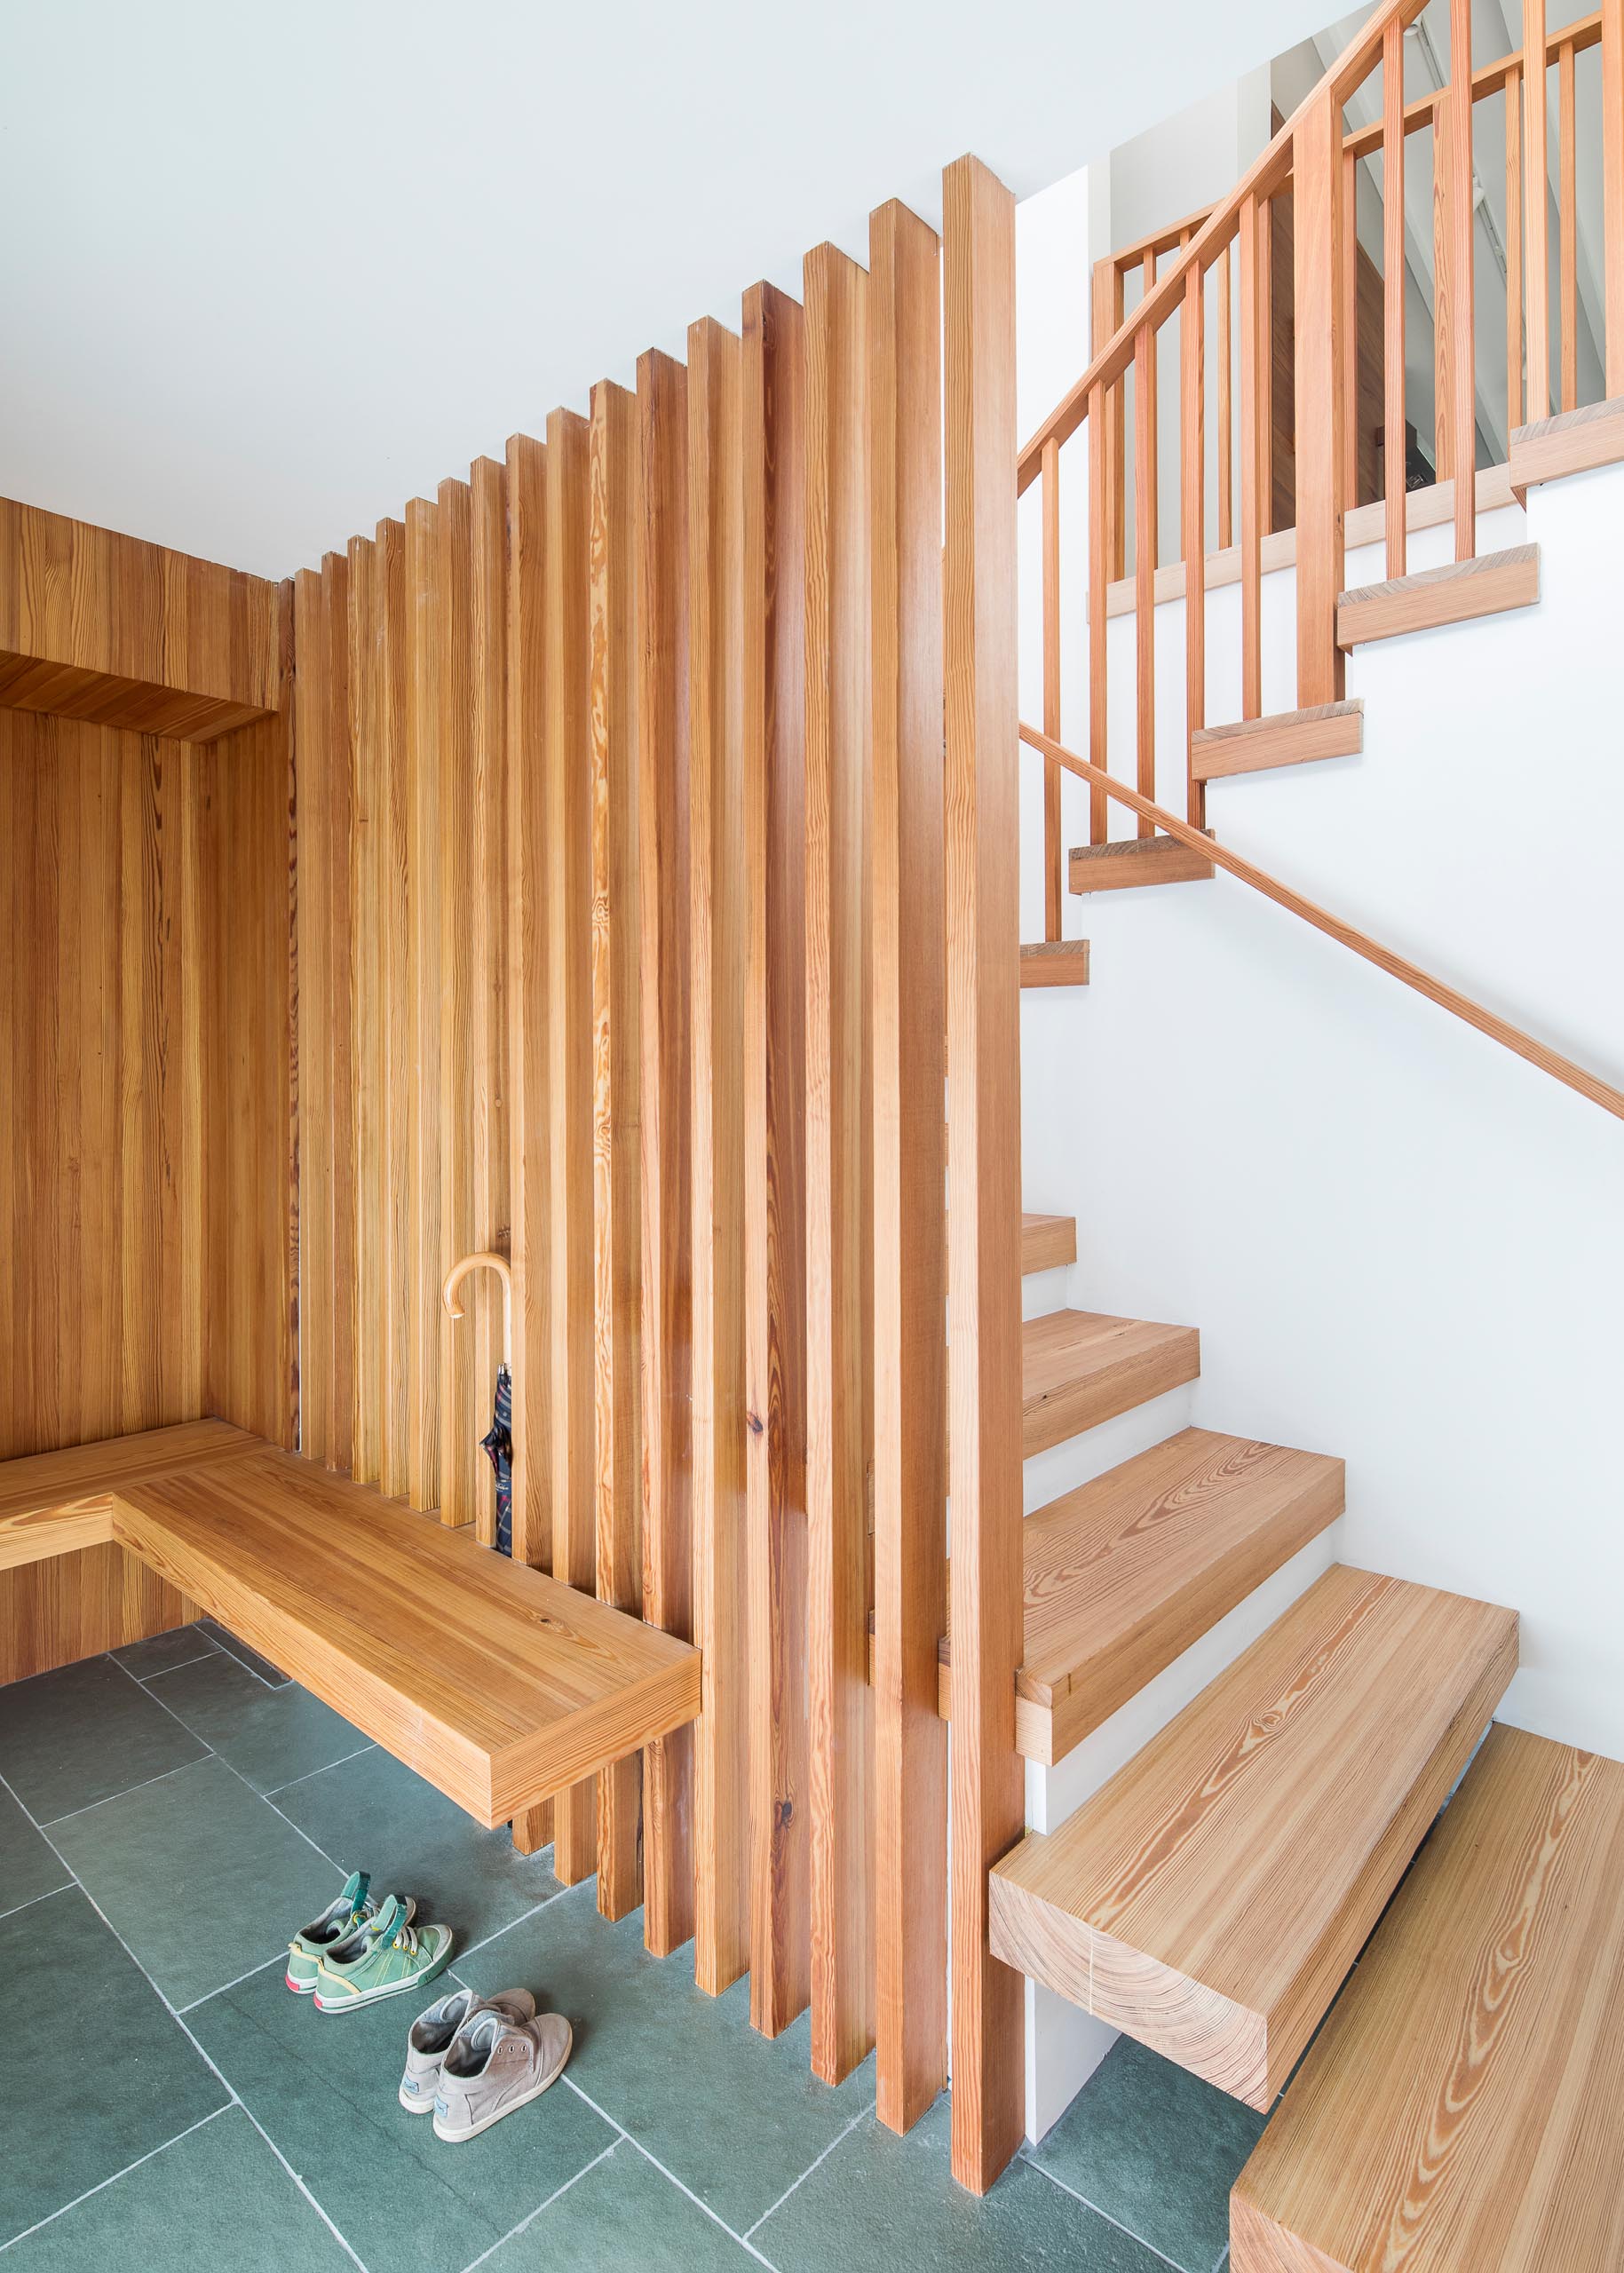 An entryway with a custom designed floating bench and wood slats that open up to the stairs that lead to the main social areas of the house.